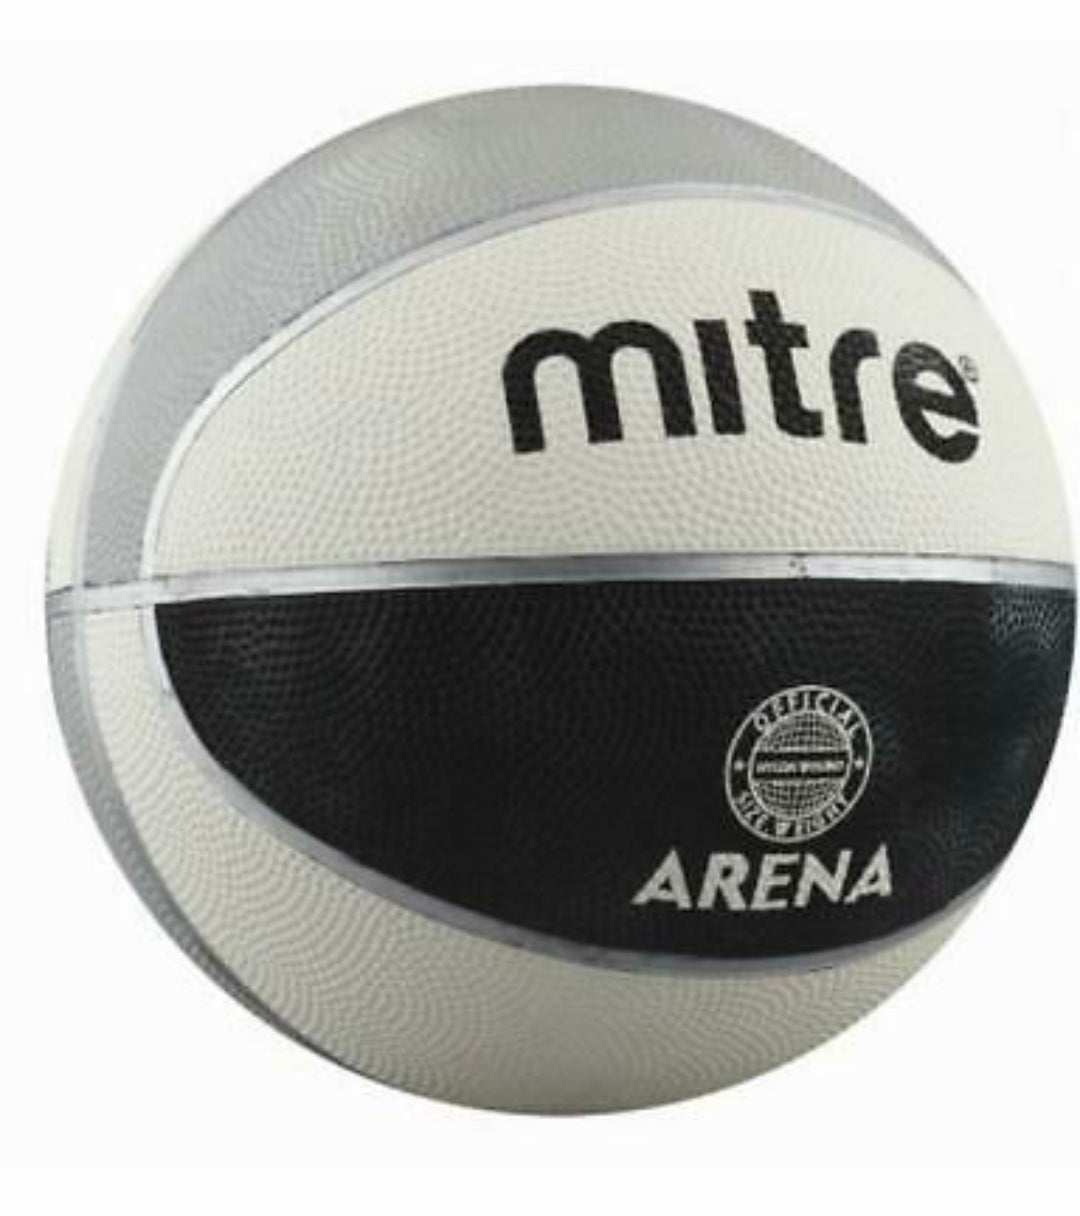 Mitre Arena Nylon Wound Basketball Blk/Wht/Sil (CSA1) Outdoor Training Equipment